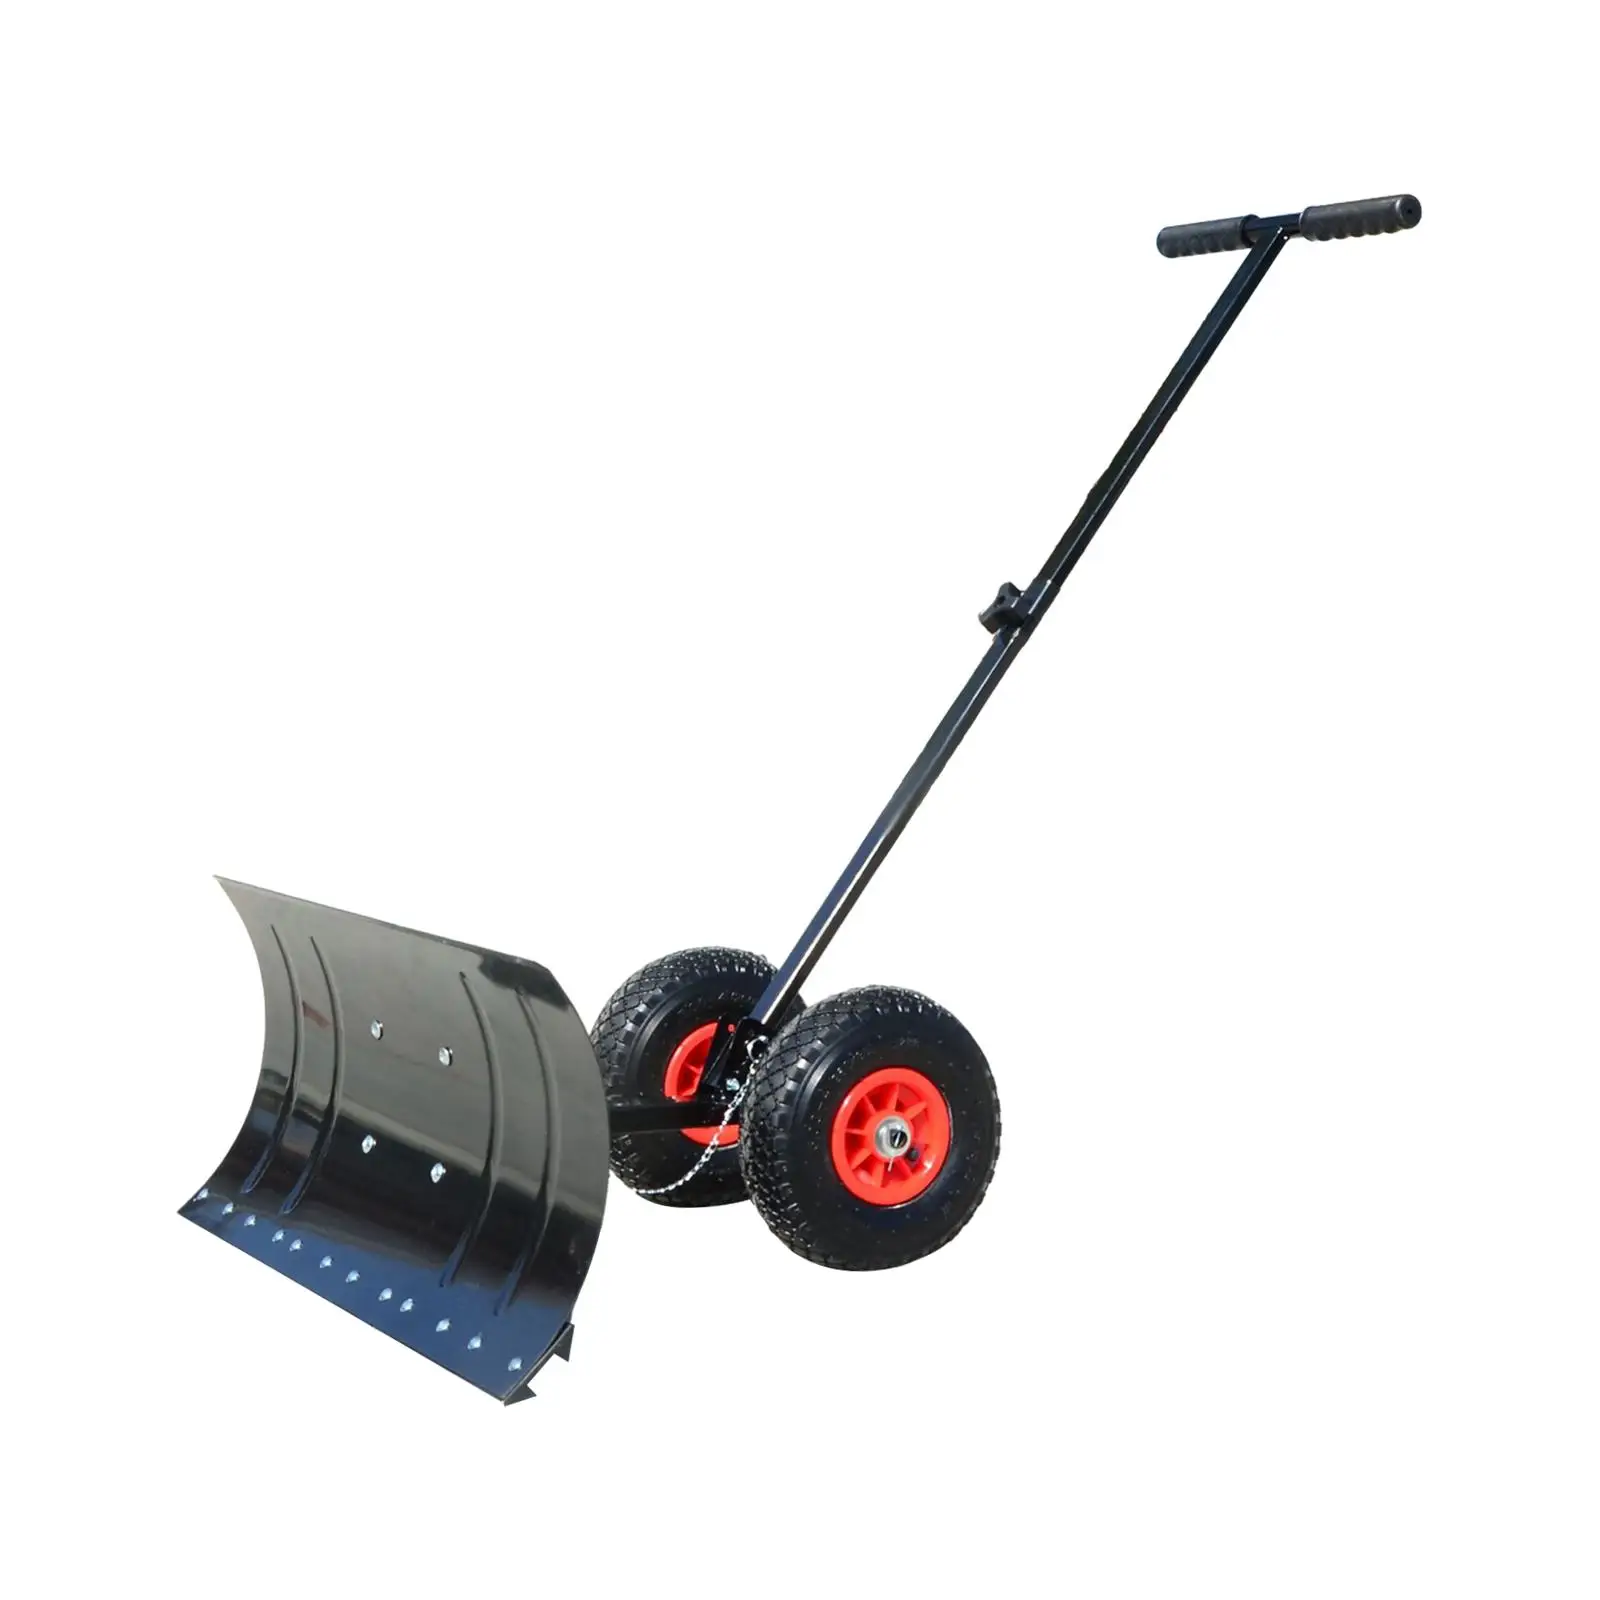 Wheeled Snow Shovel Pusher Outdoor Heavy Duty Portable Adjustable Rolling Removal Tool for Park Pavement Sidewalk Clearing Car